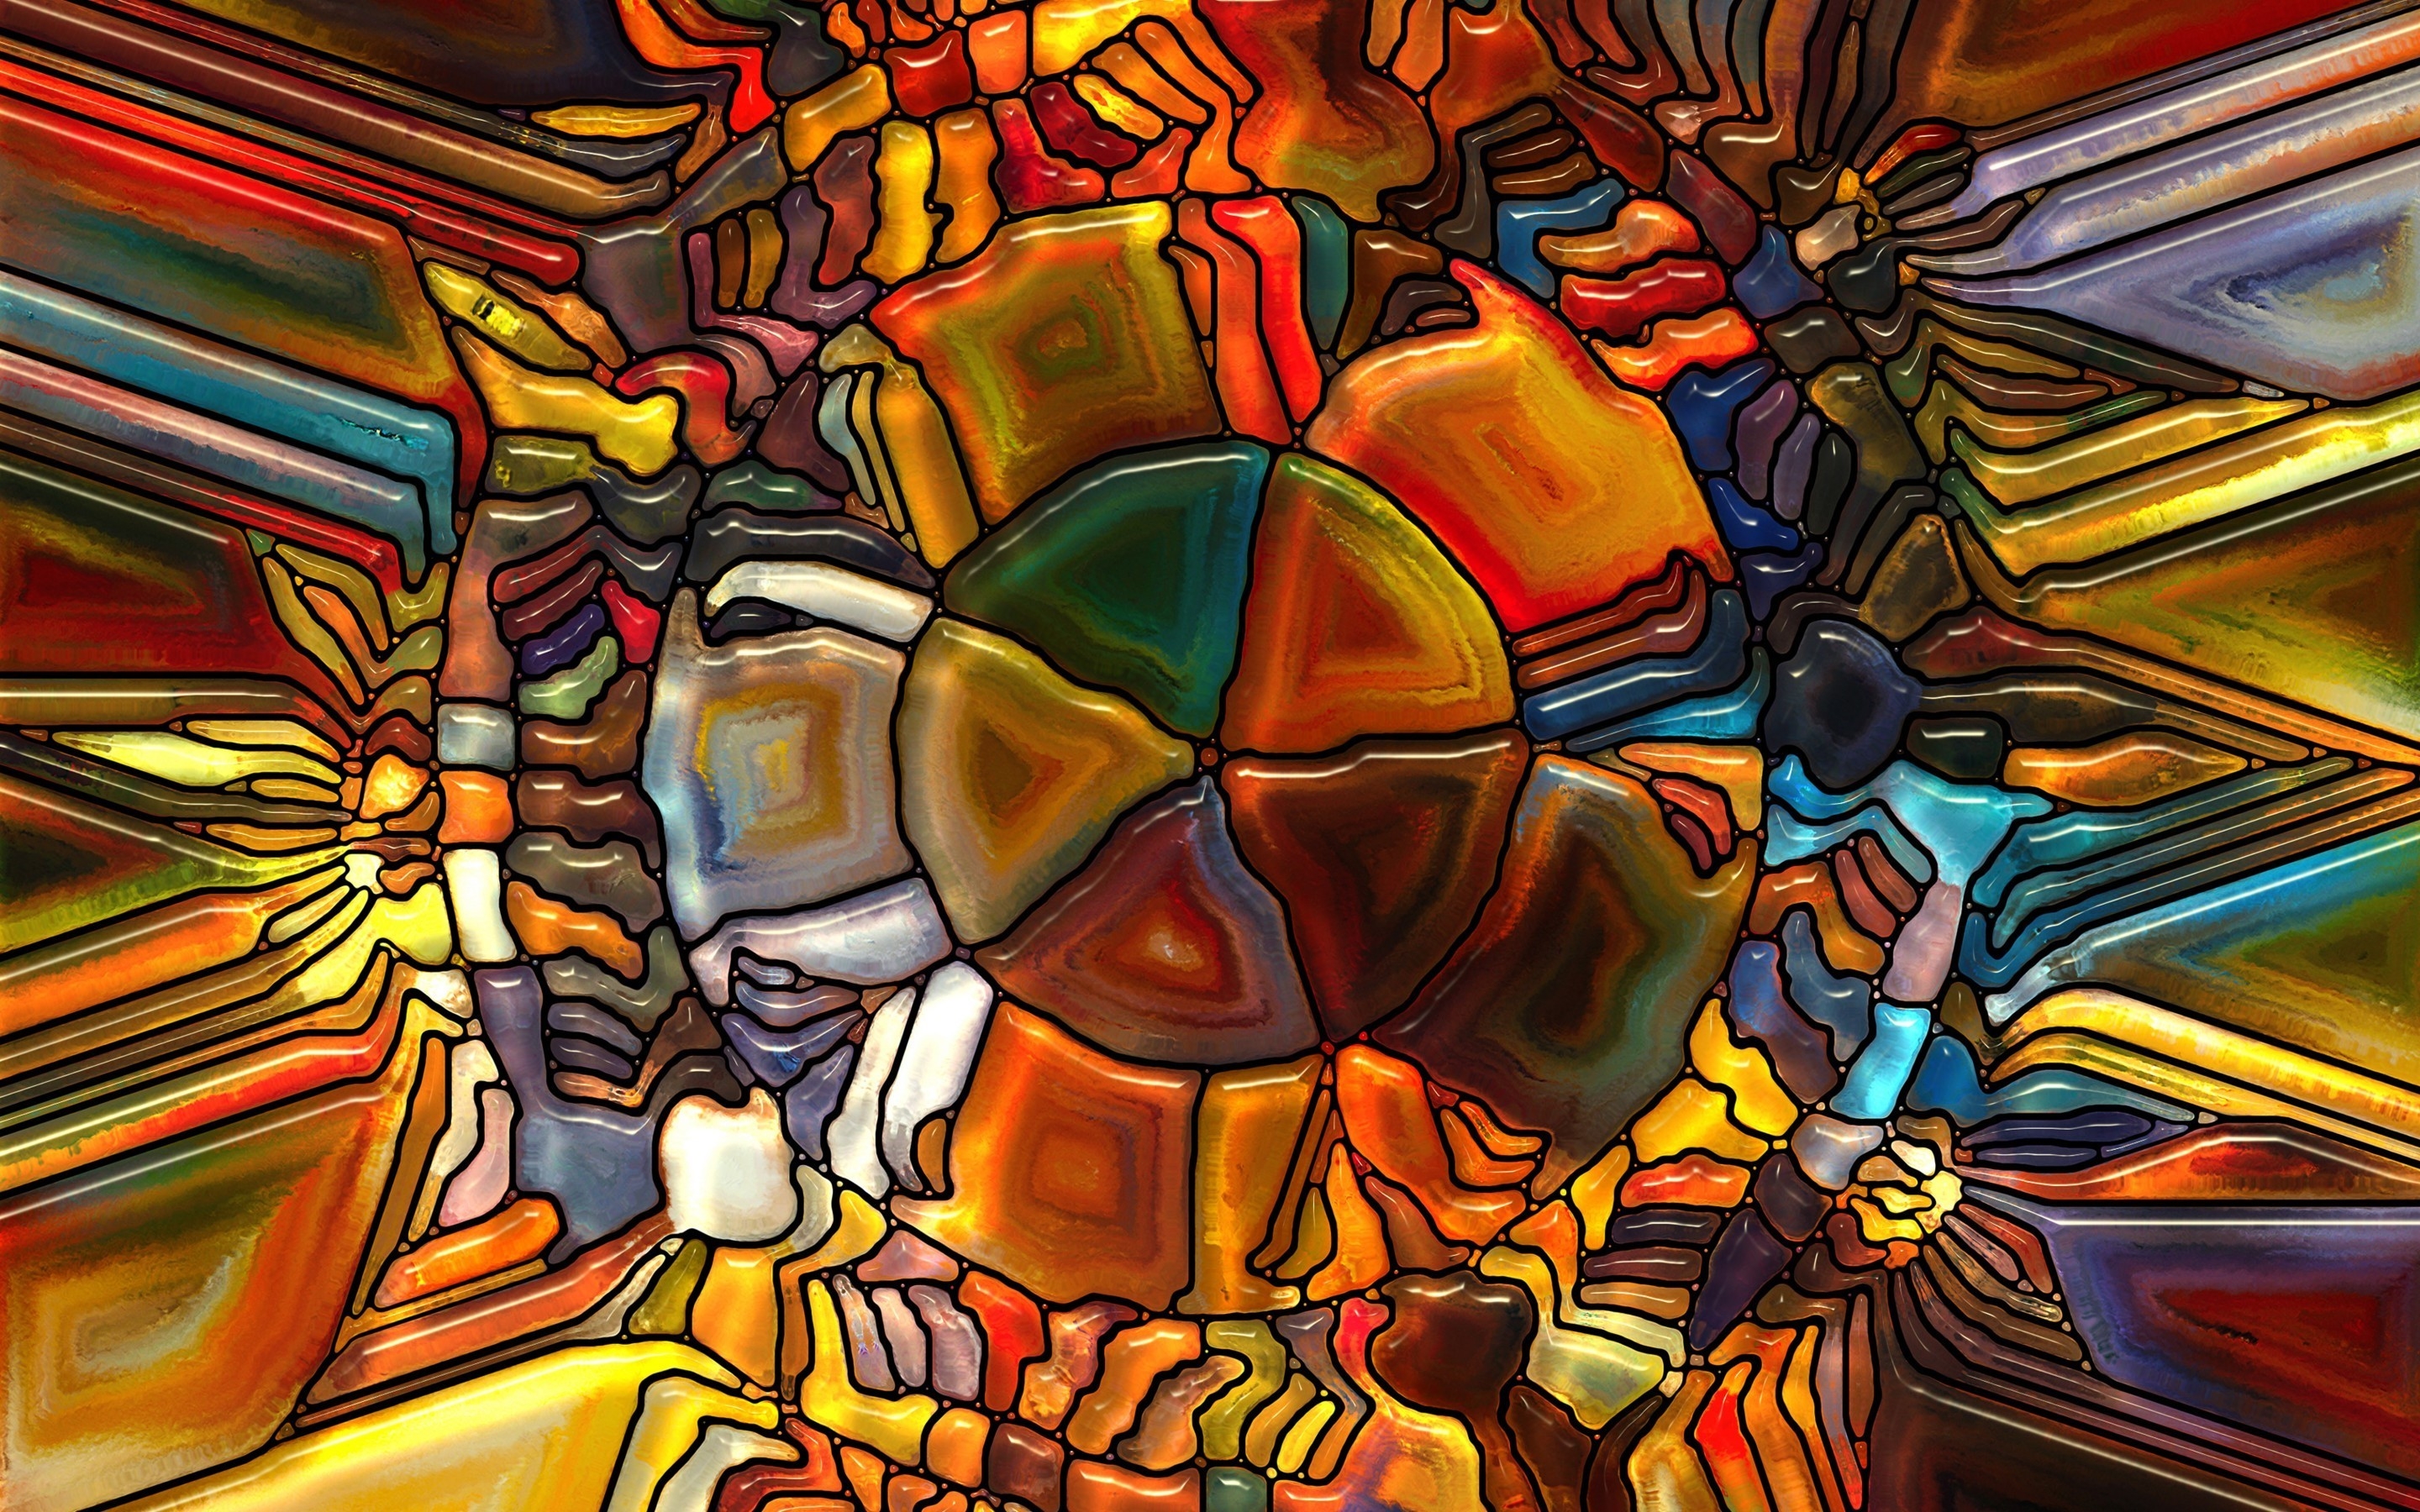 Stained Glass for 2880 x 1800 Retina Display resolution